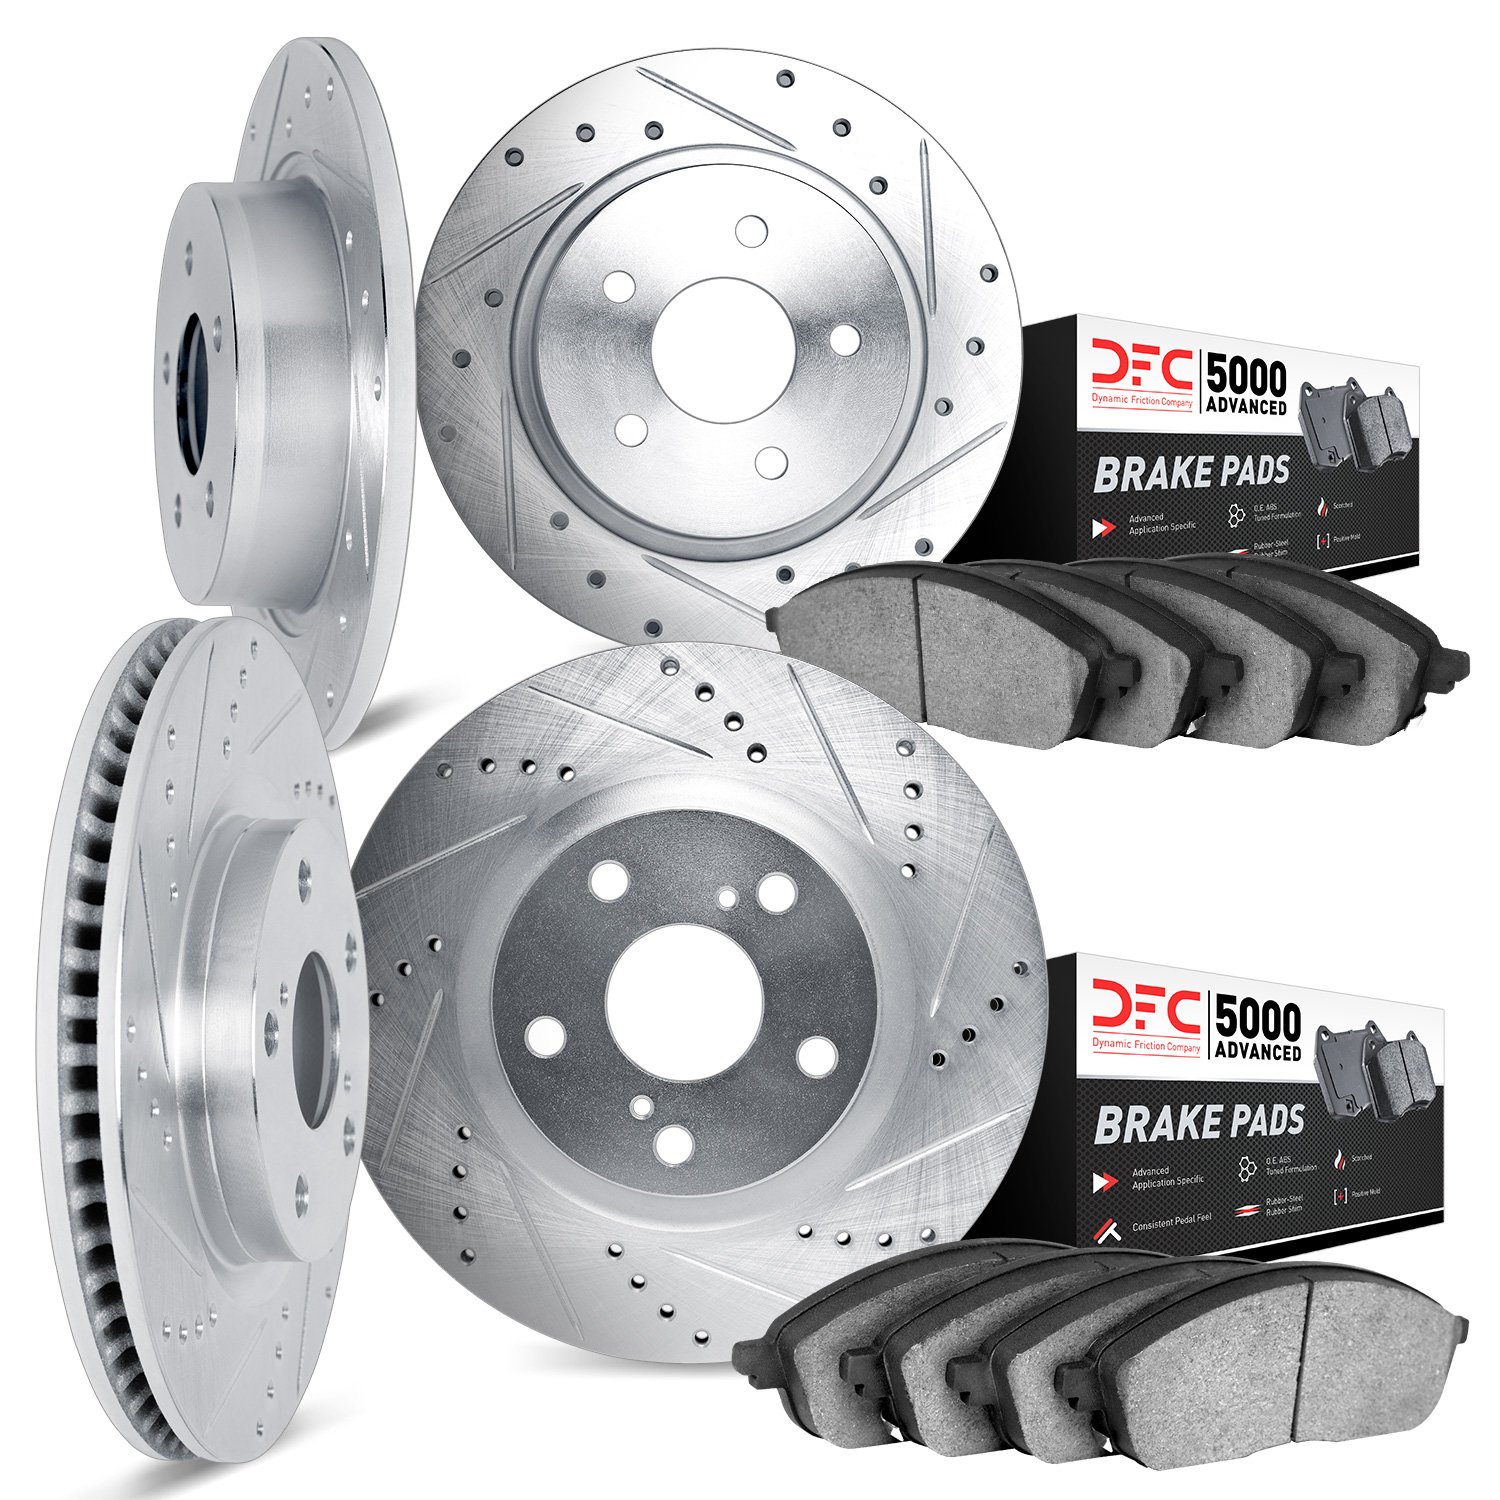 7504-76143 Drilled/Slotted Brake Rotors w/5000 Advanced Brake Pads Kit [Silver], 2004-2007 Lexus/Toyota/Scion, Position: Front a